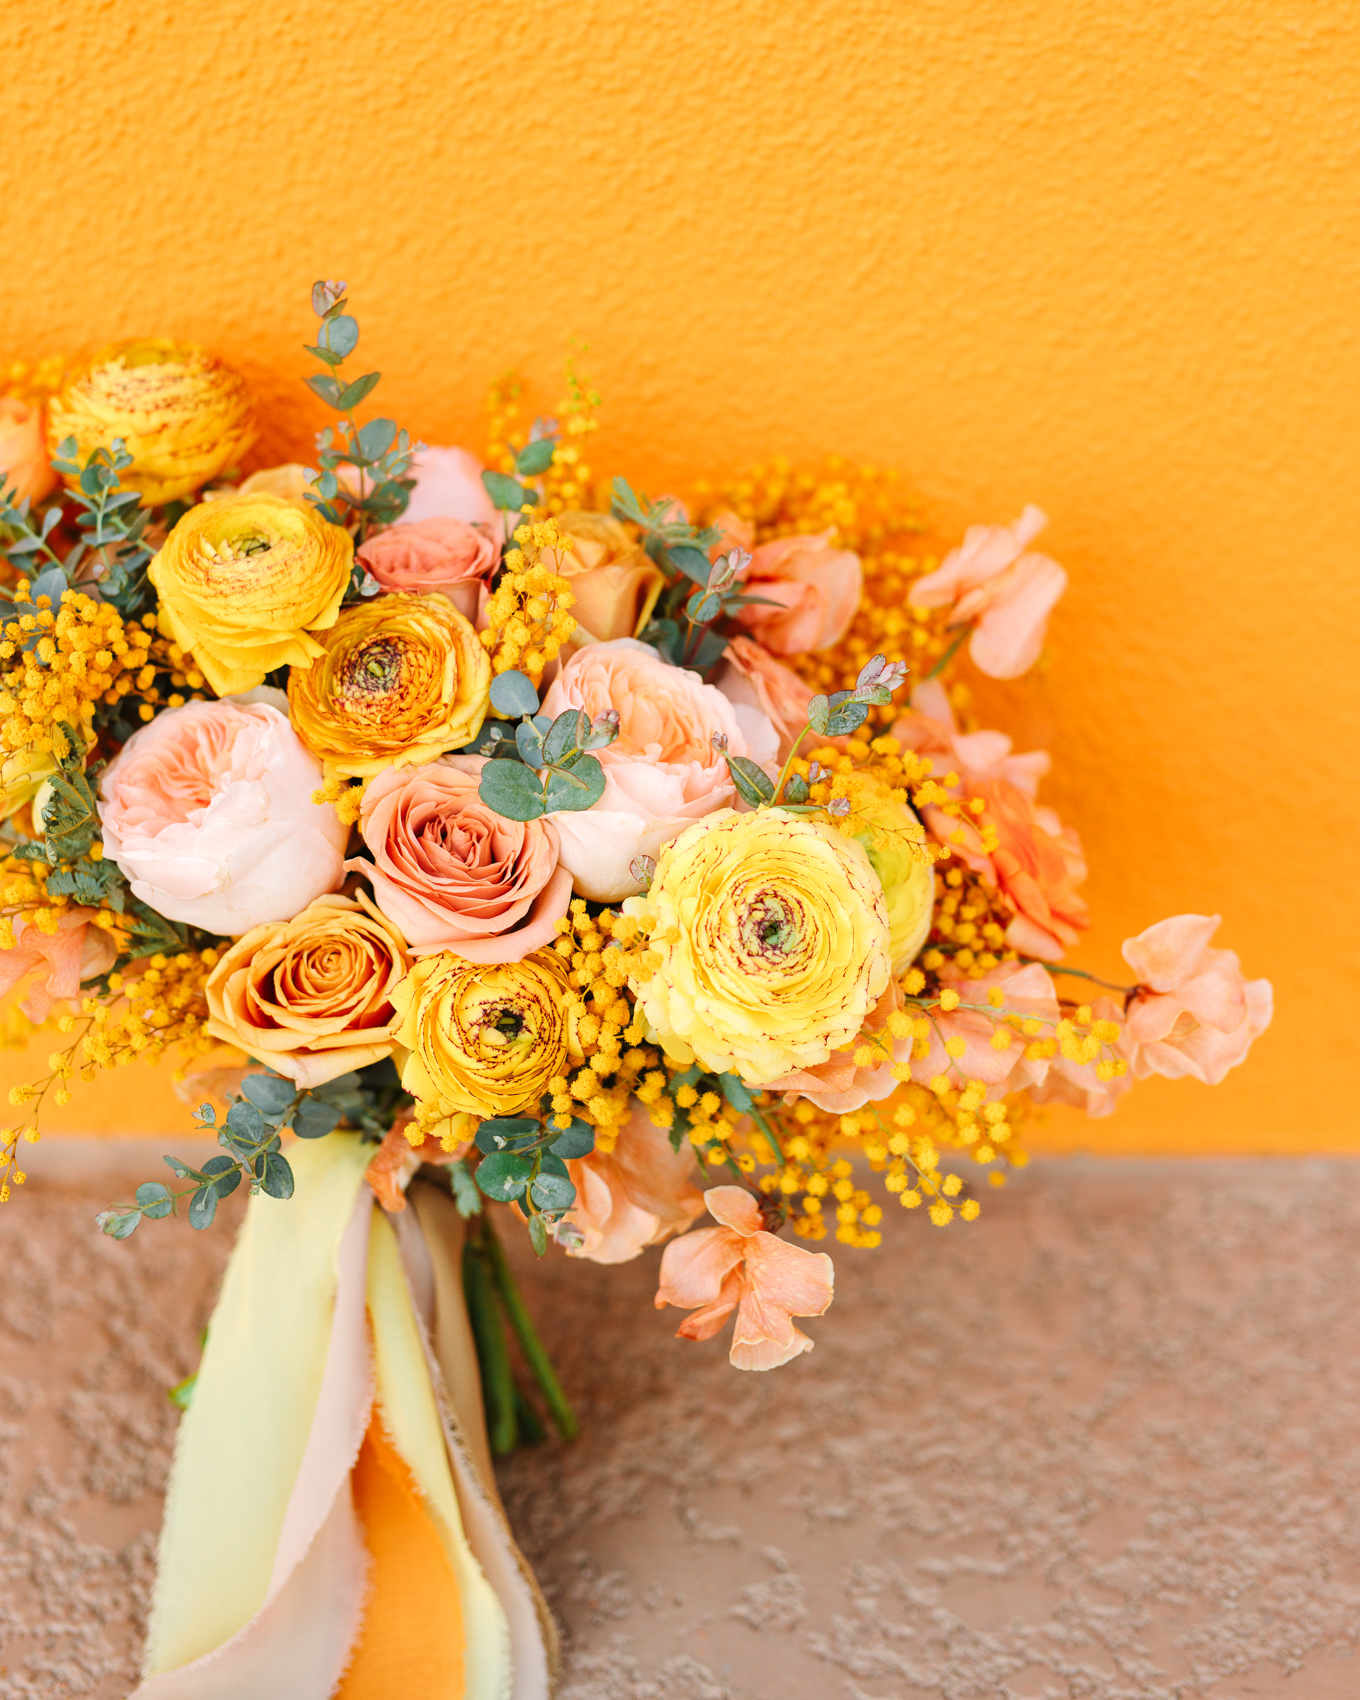 Mustard yellow and peach wedding bouquet | Beautiful bridal bouquet inspiration and advice | Colorful and elevated wedding photography for fun-loving couples in Southern California | #weddingflowers #weddingbouquet #bridebouquet #bouquetideas #uniquebouquet   Source: Mary Costa Photography | Los Angeles